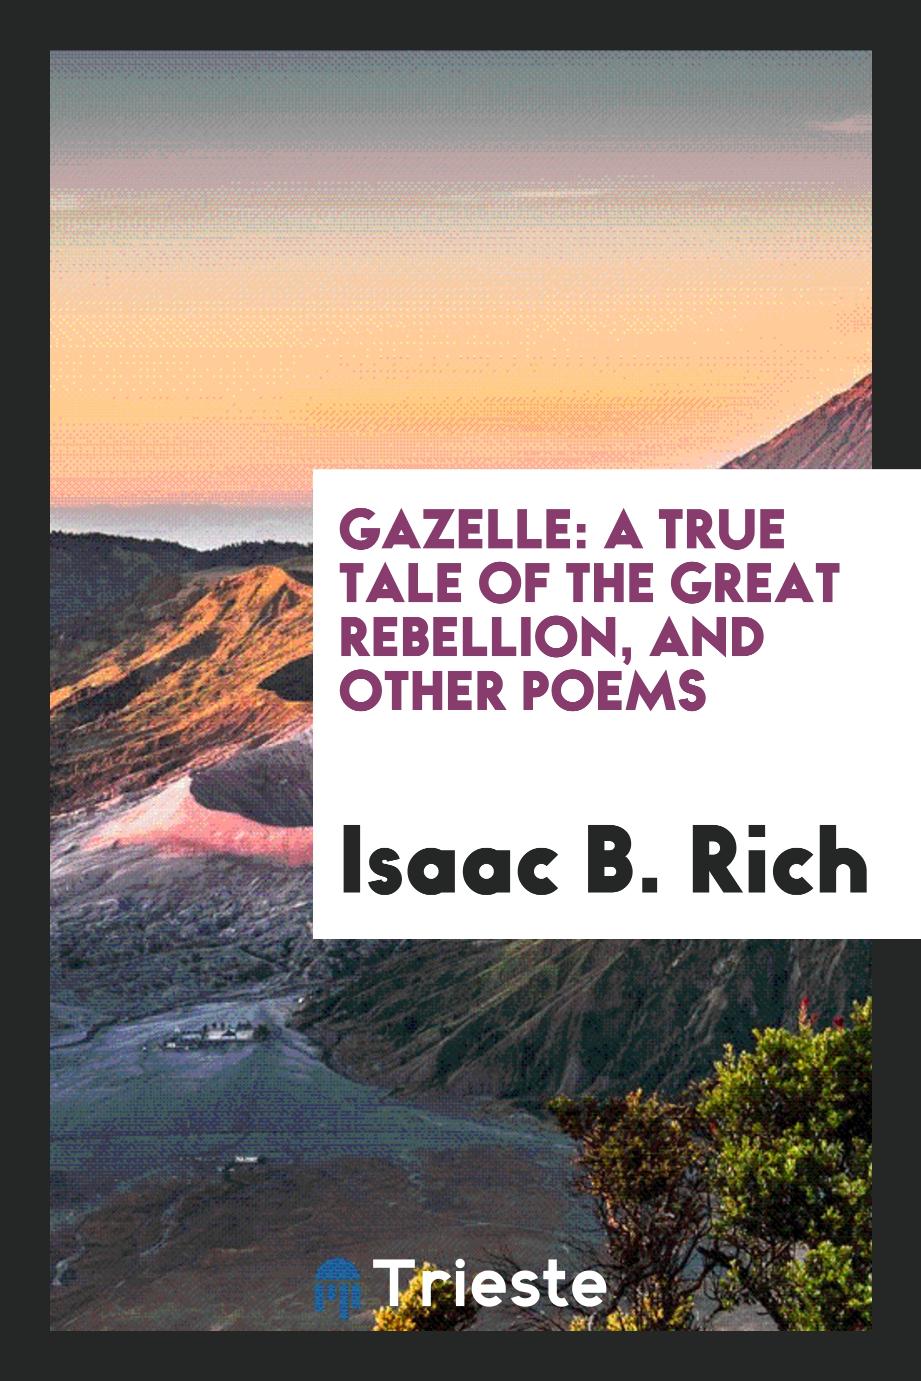 Gazelle: A True Tale of the Great Rebellion, and Other Poems